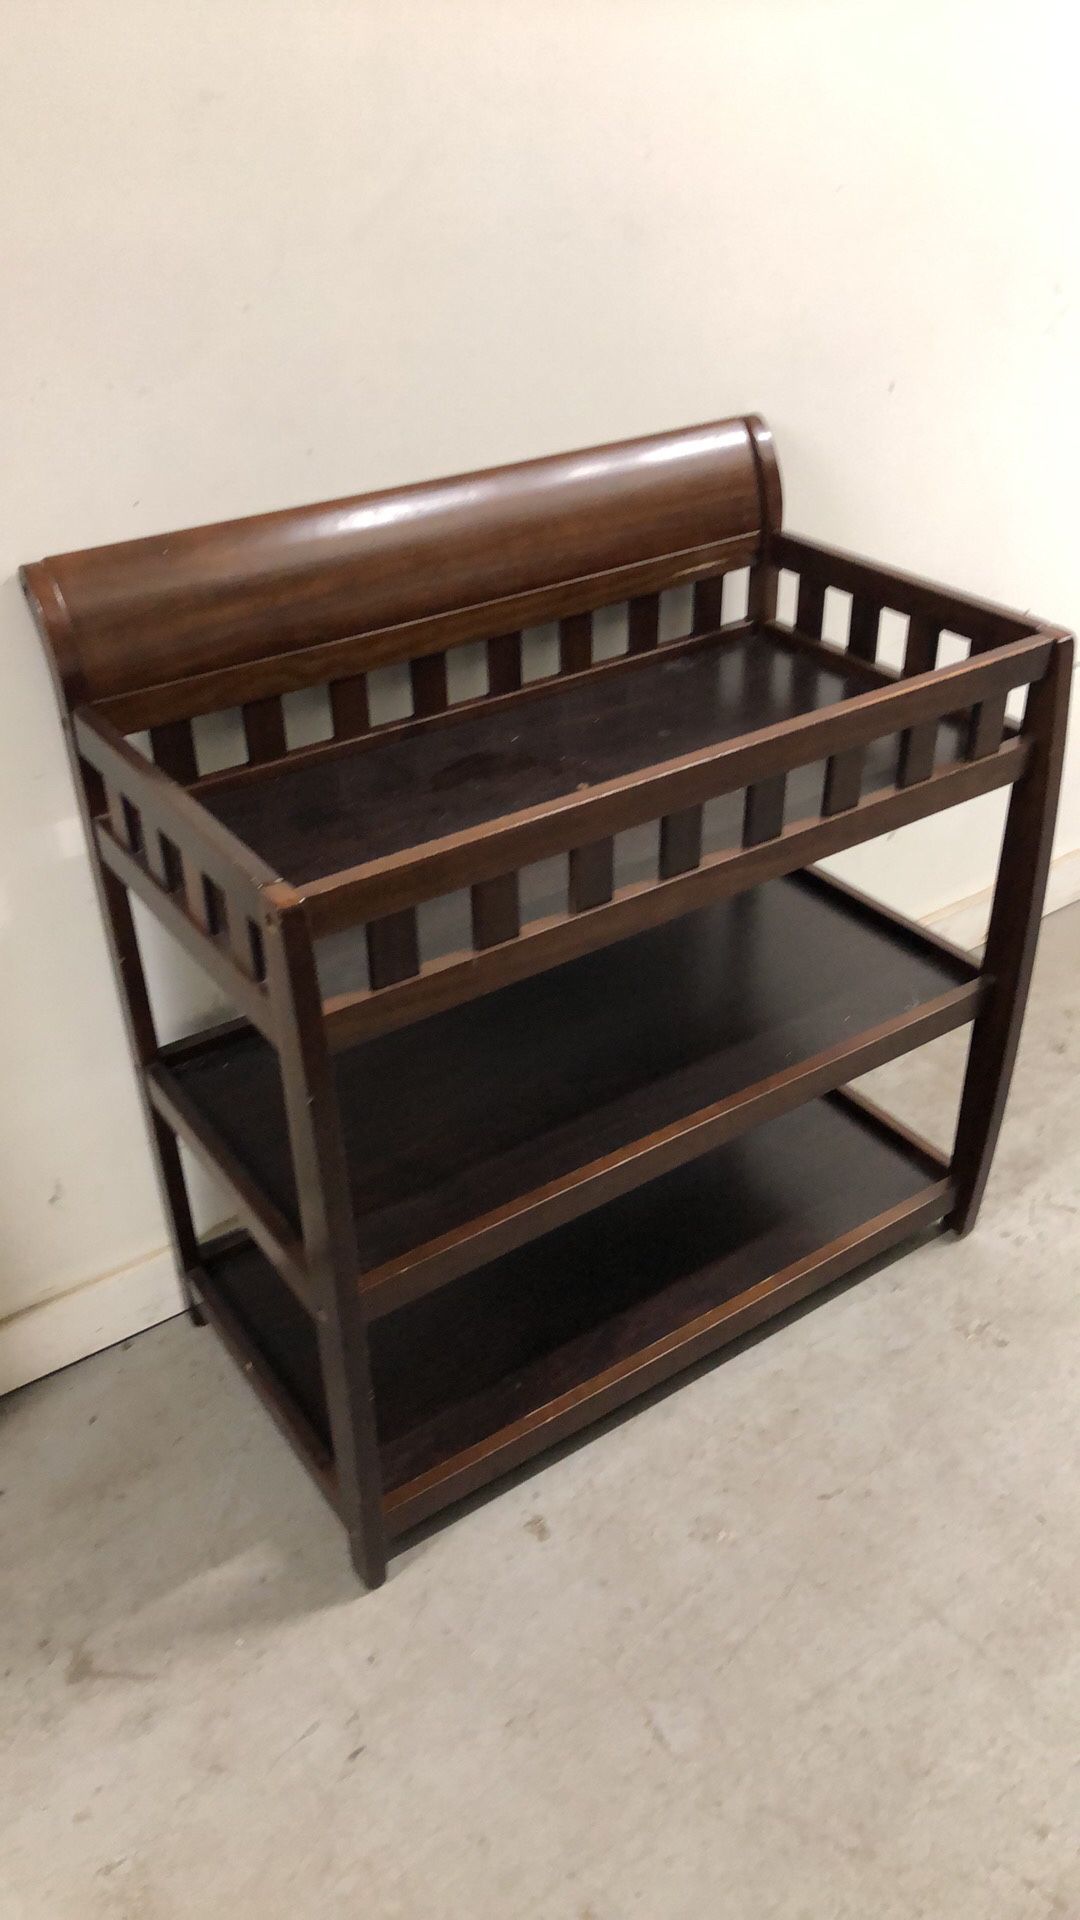 35”wx17”dx32”h Baby changing table